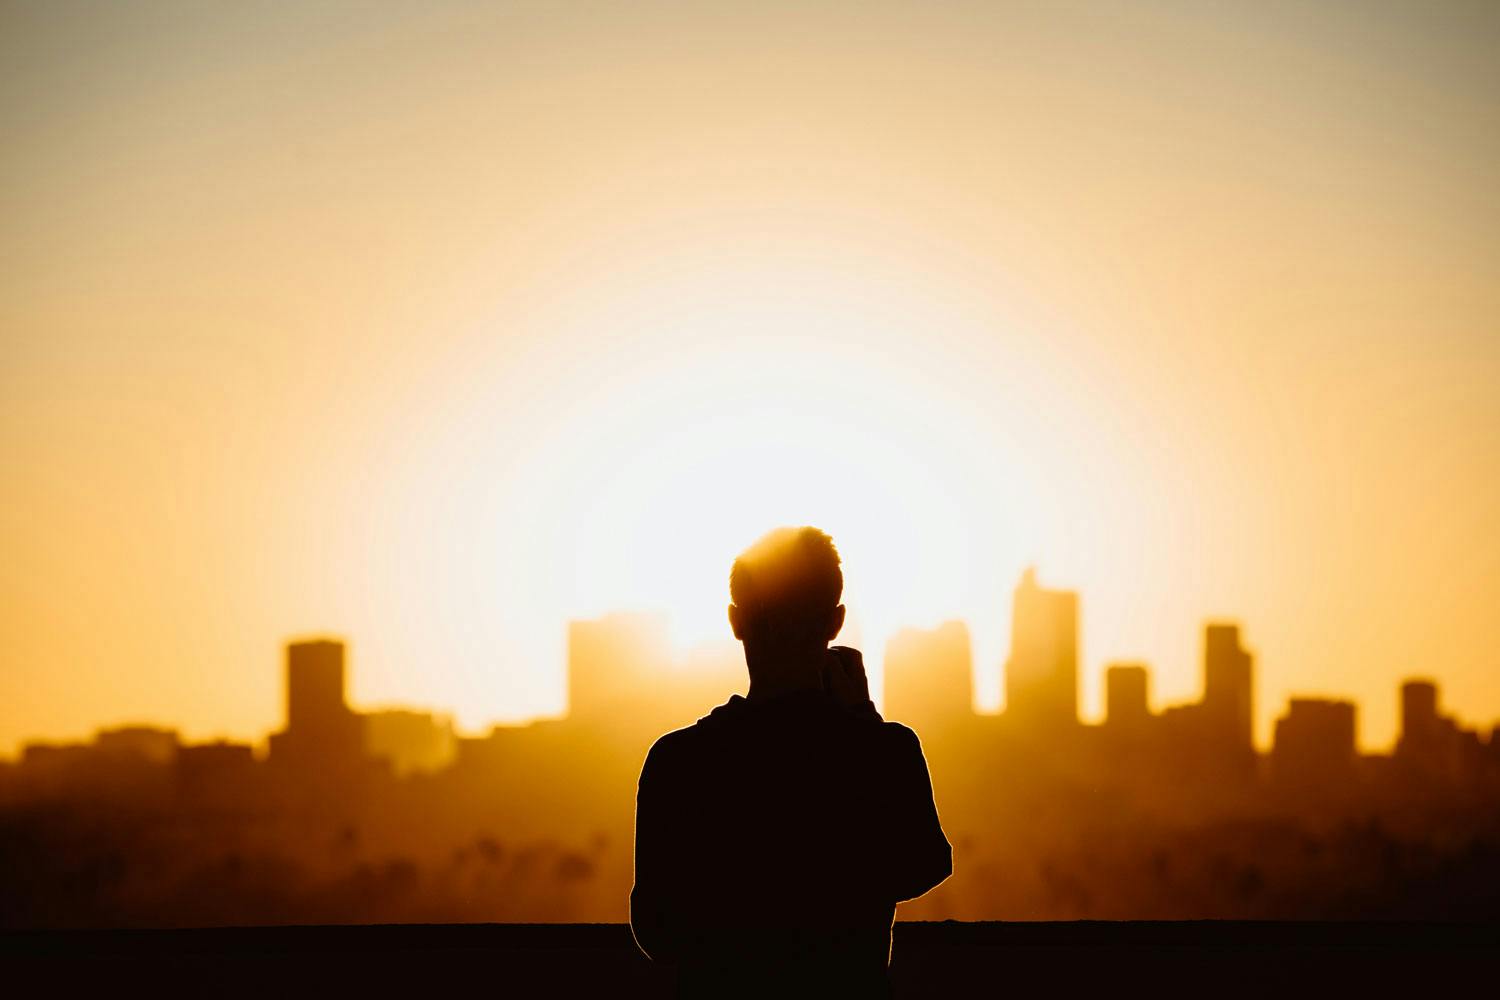 A silhouette of a man with a skyline of the city in the background at sunset.